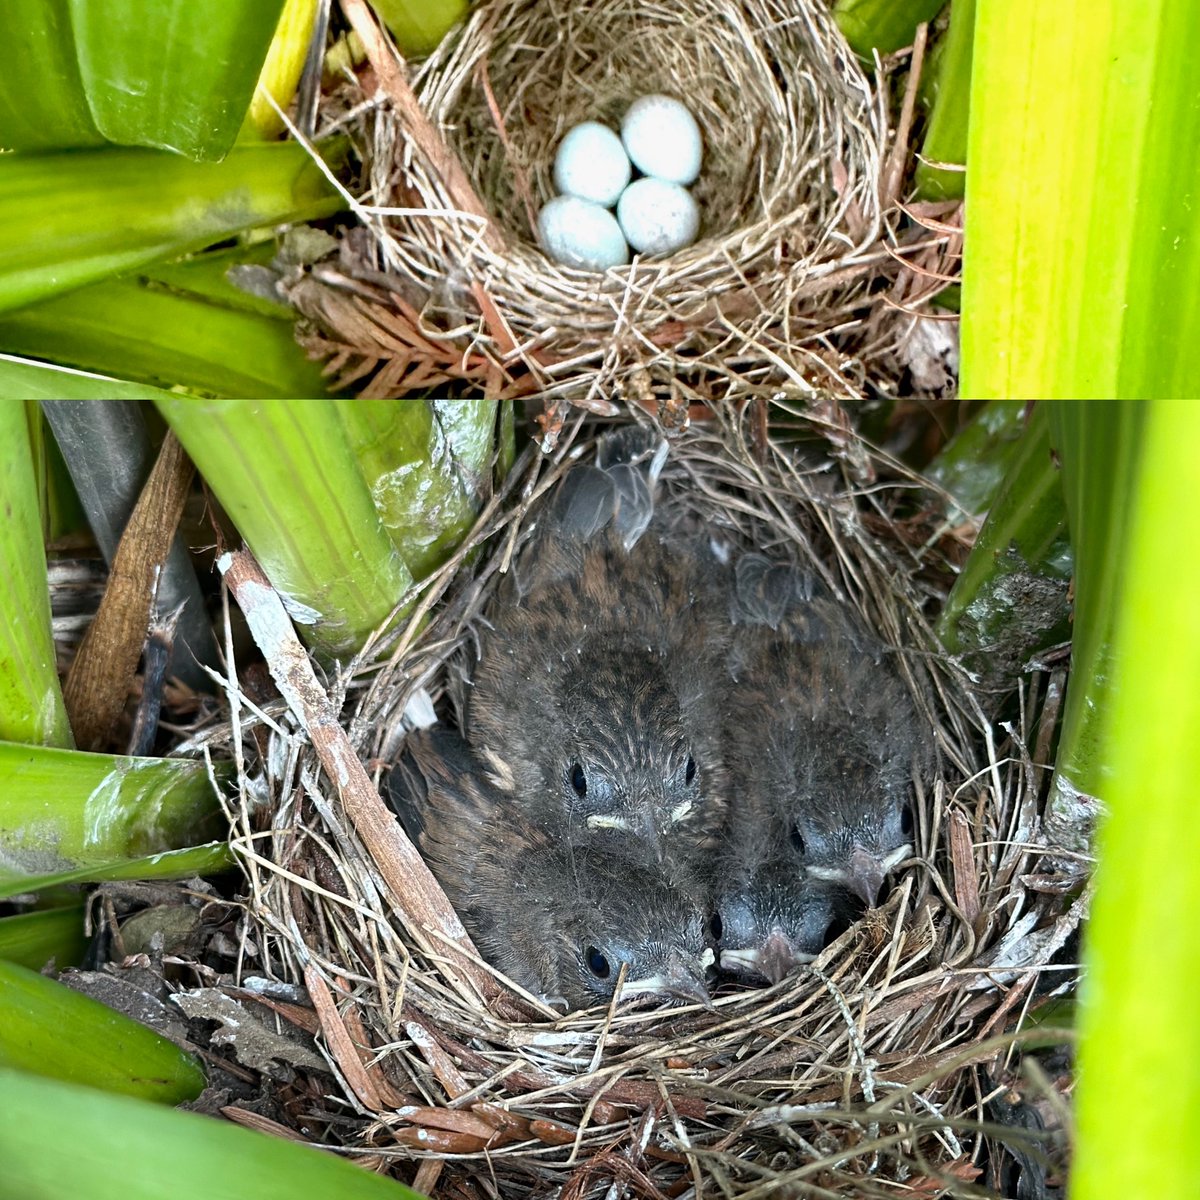 Some 'Spring Things' are happening!

#Spring #HappySpring #Naturephoto #babybirds